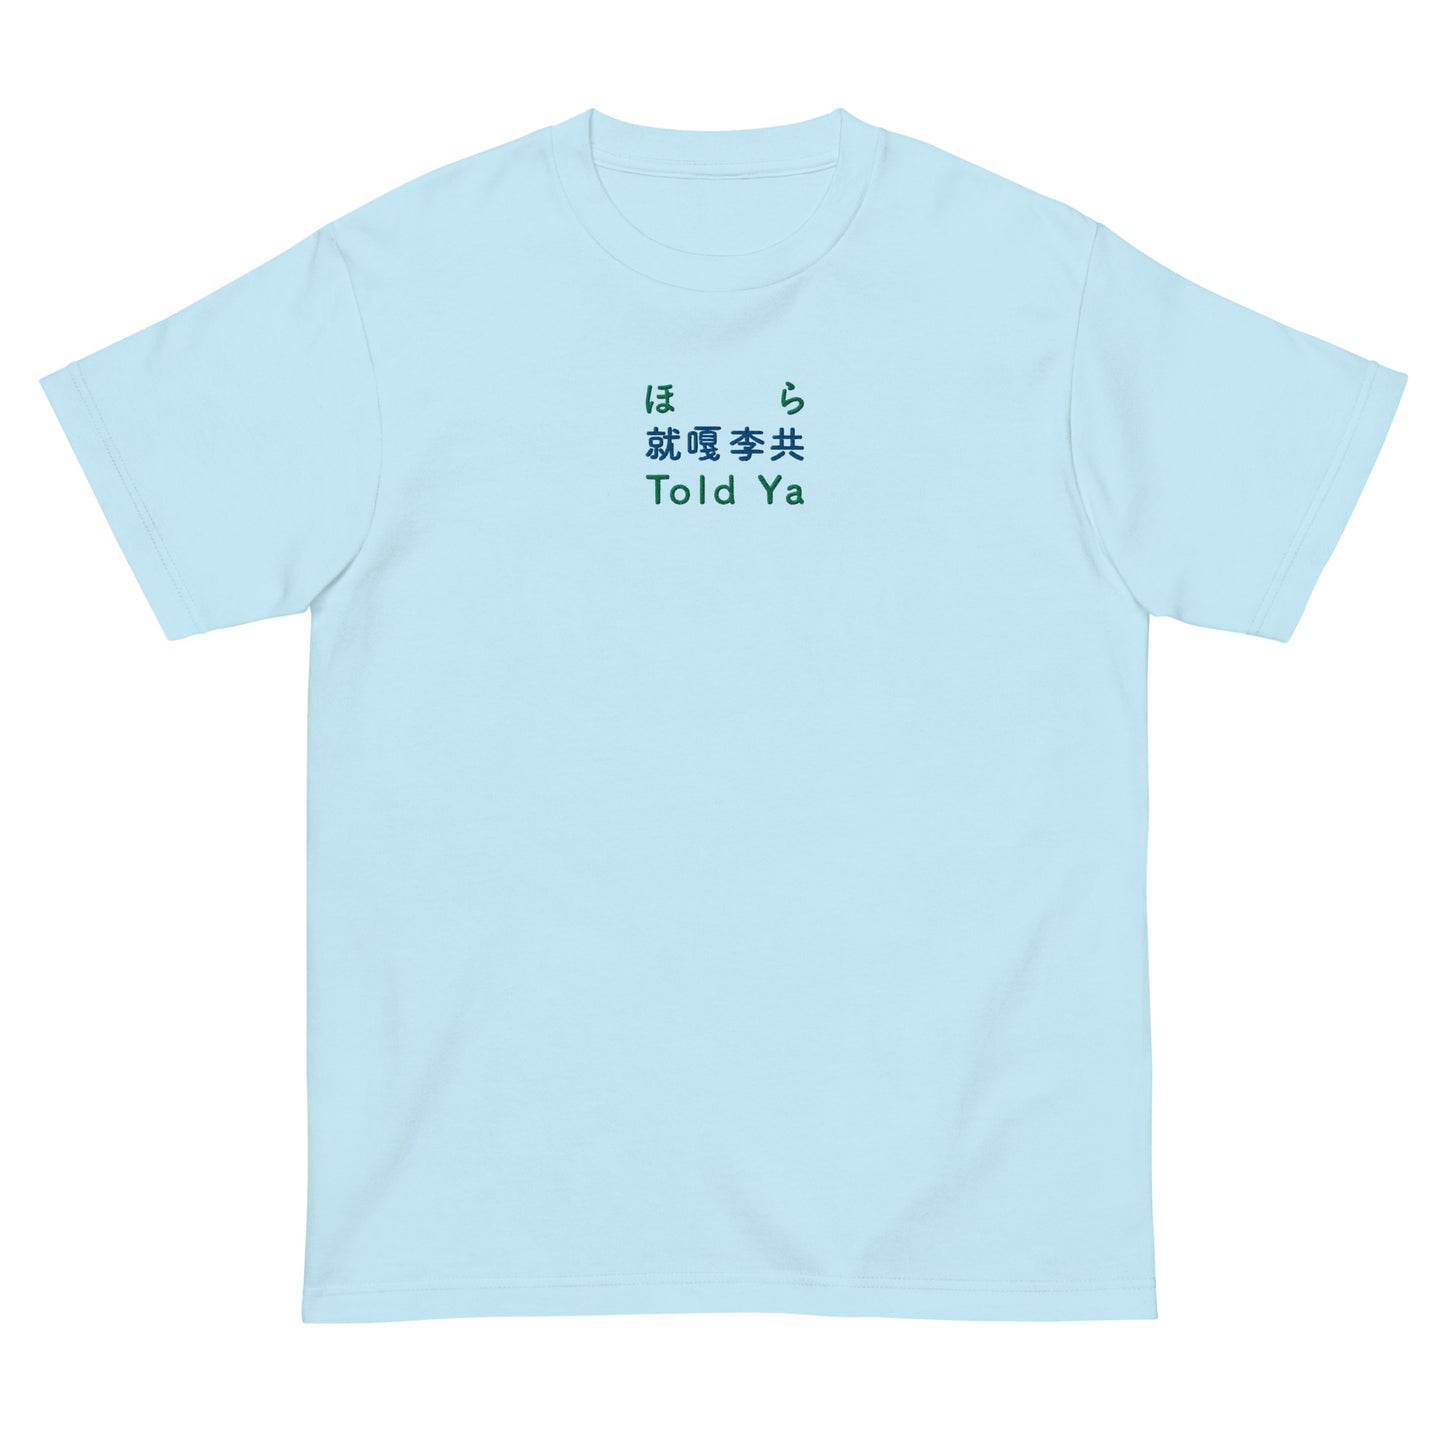 Light Blue High Quality Tee - Front Design with an Blue,Green Embroidery "Told Ya" in Japanese,Chinese and English